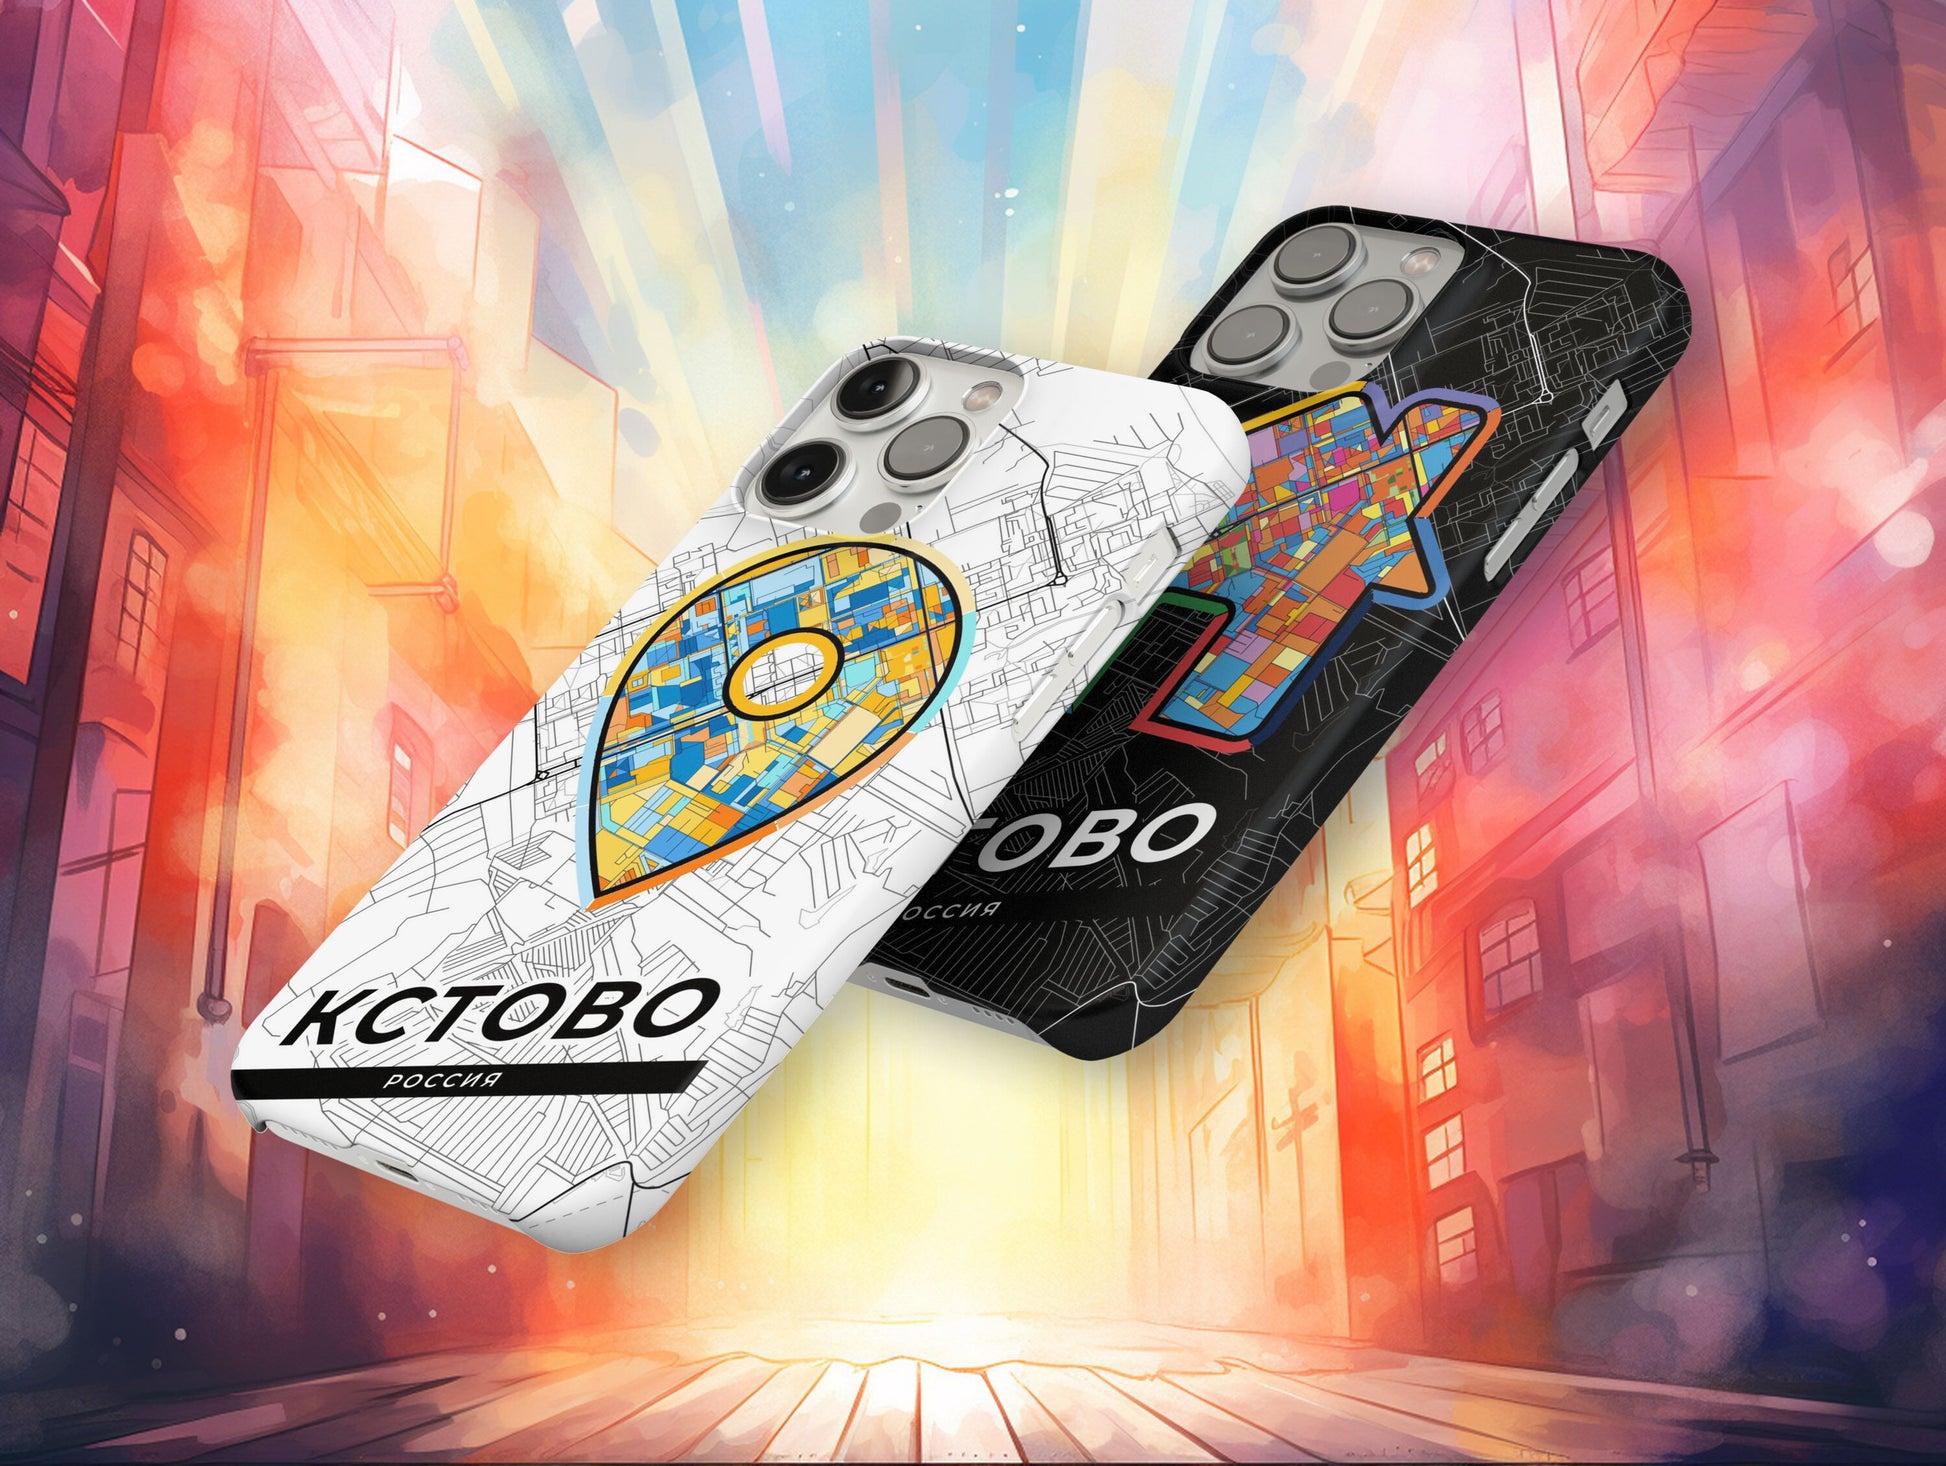 Kstovo Russia slim phone case with colorful icon. Birthday, wedding or housewarming gift. Couple match cases.